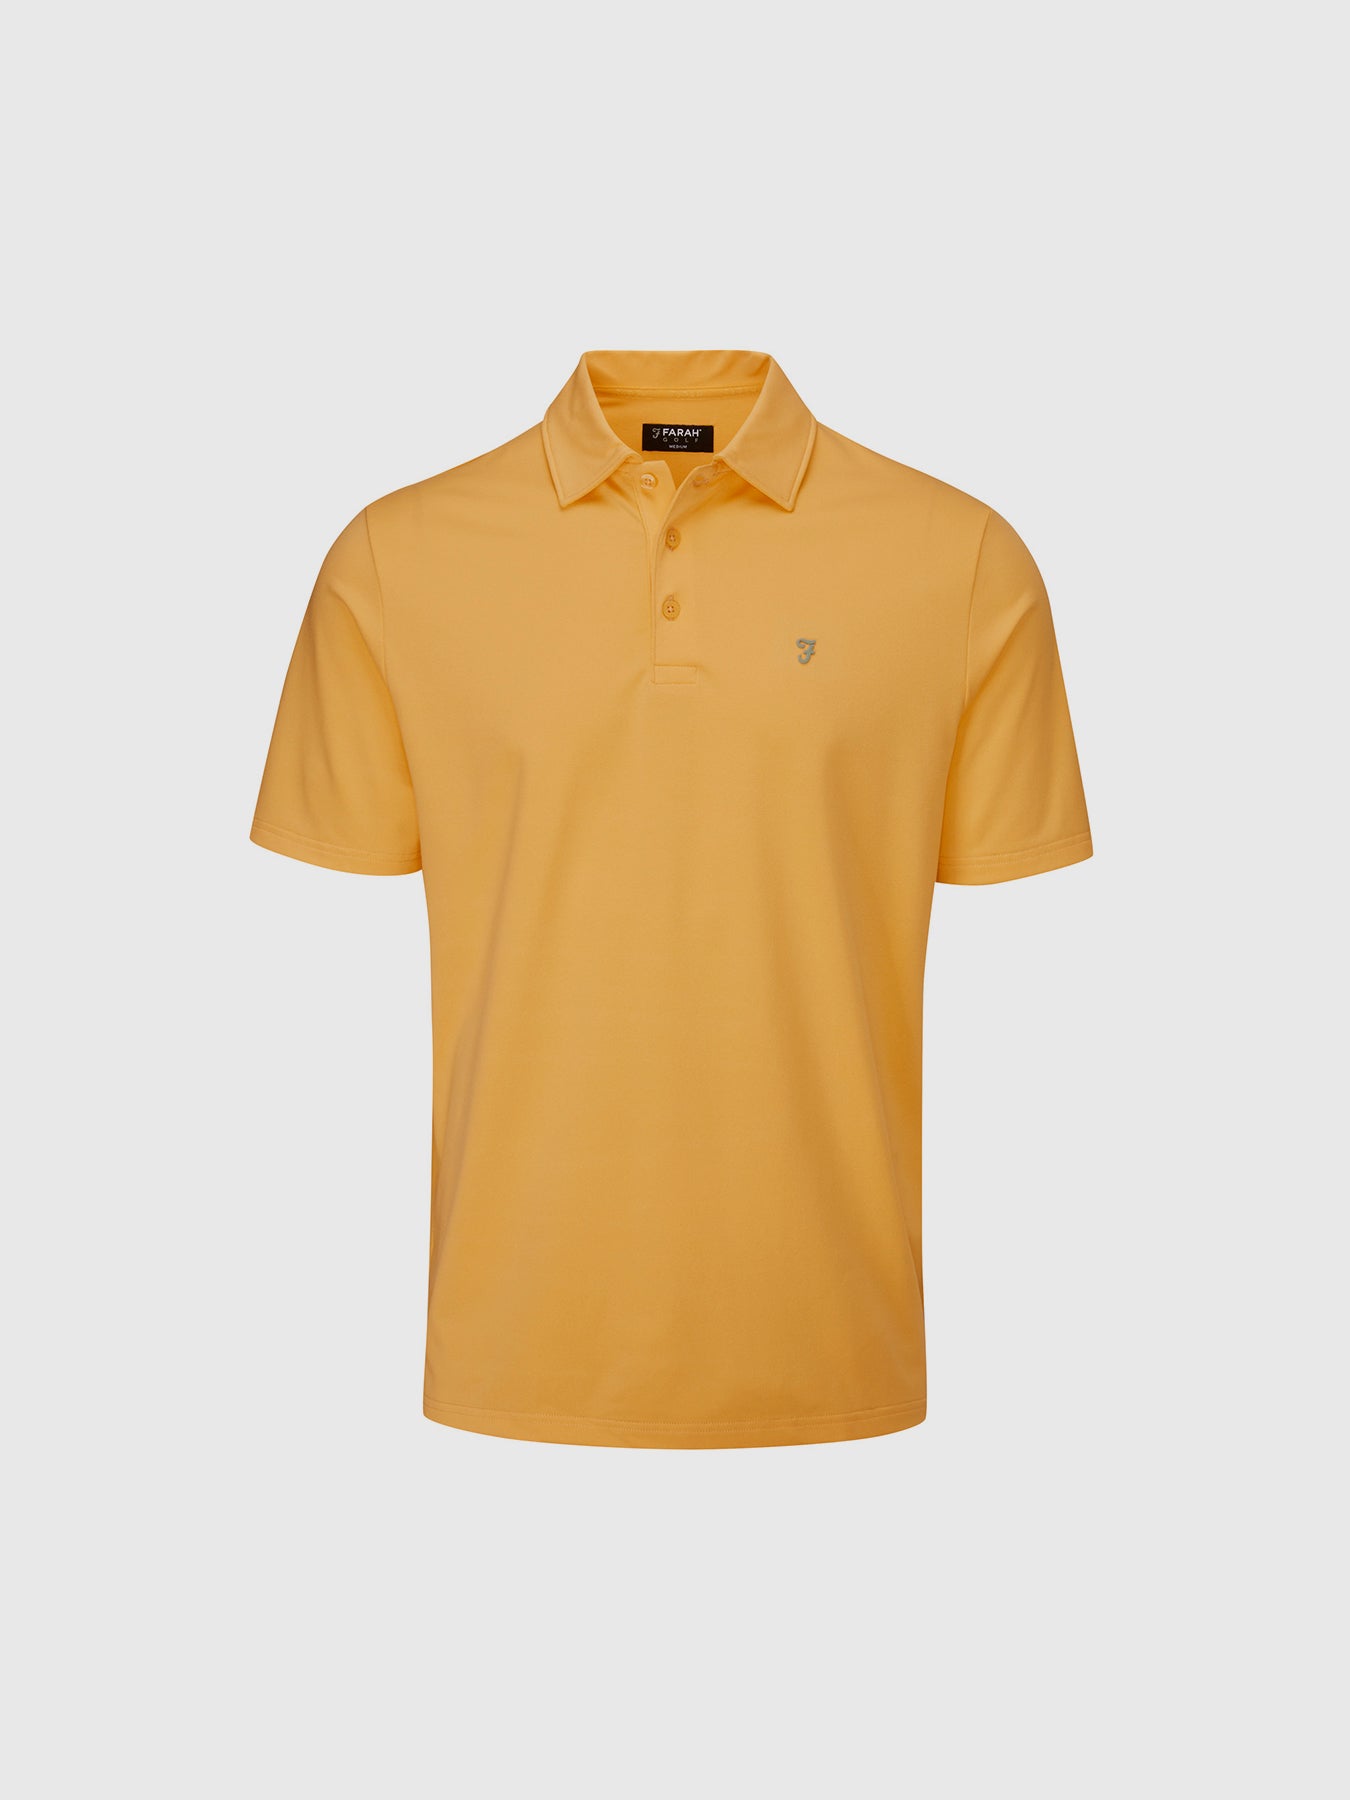 View Keller Golf Polo Shirt In Apricot information